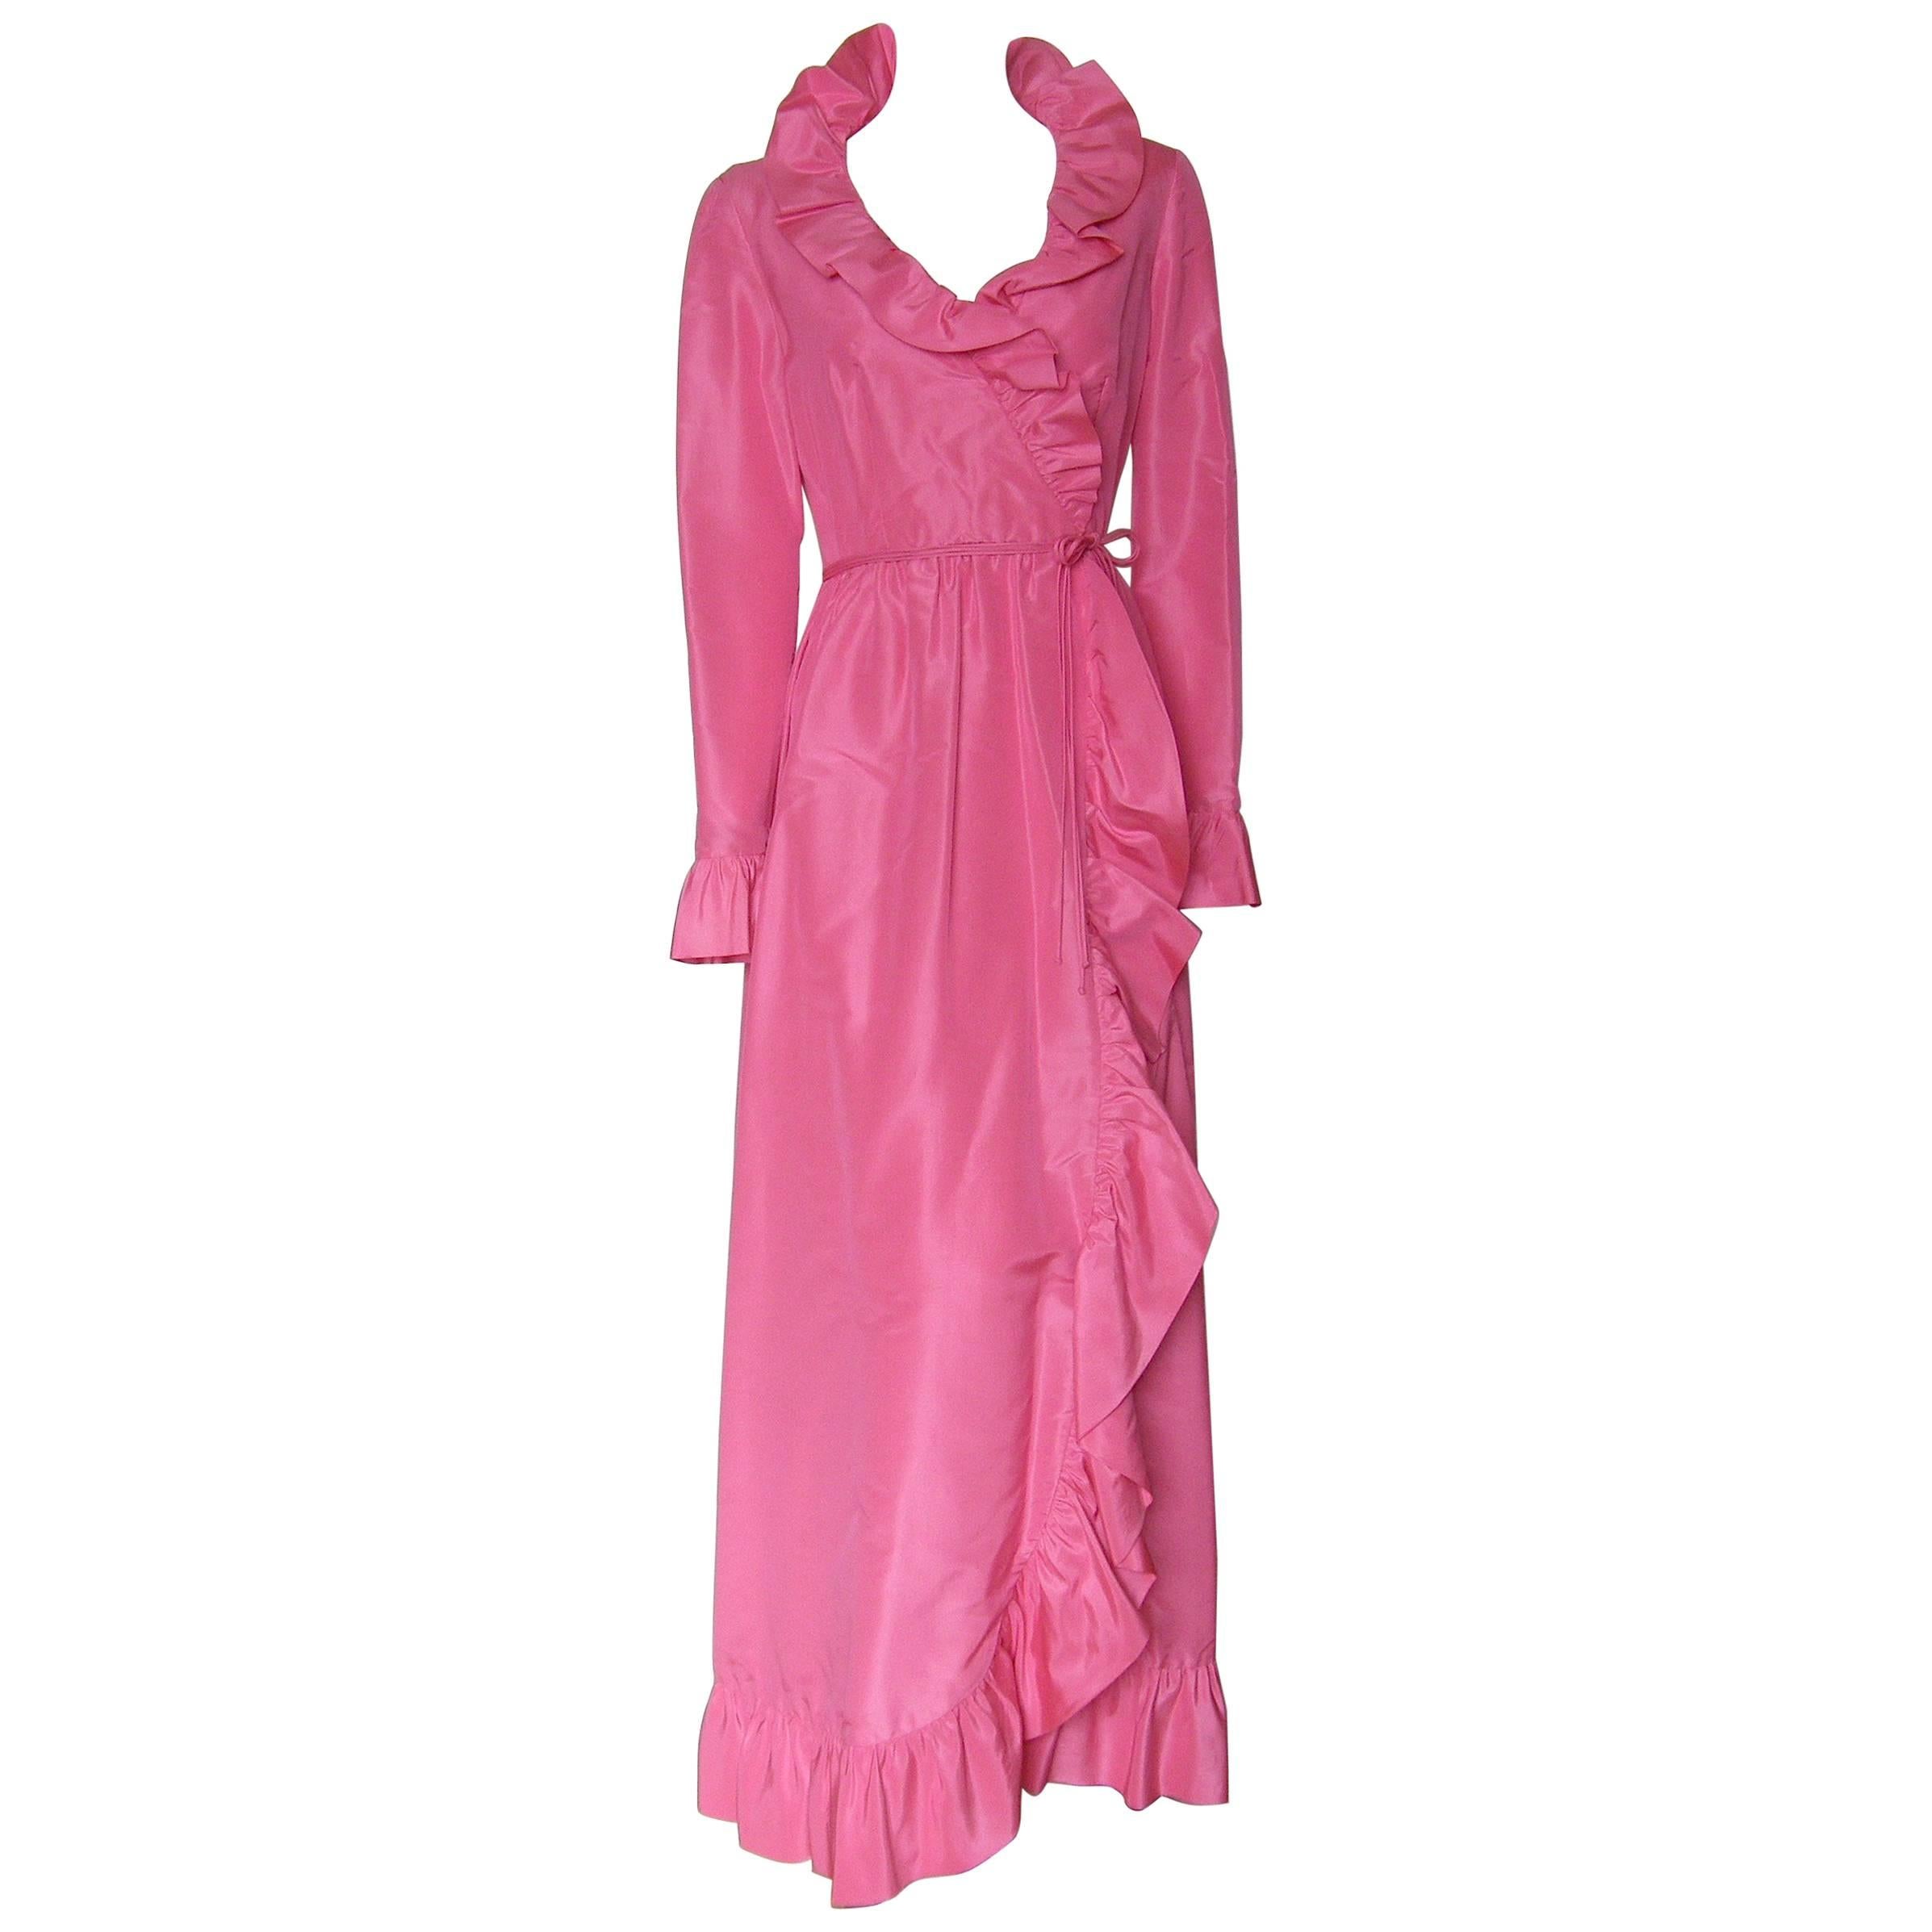 Mollie Parnis Pink Silk Gown Wrap Style with Ruffled Edges and Skirt Slit